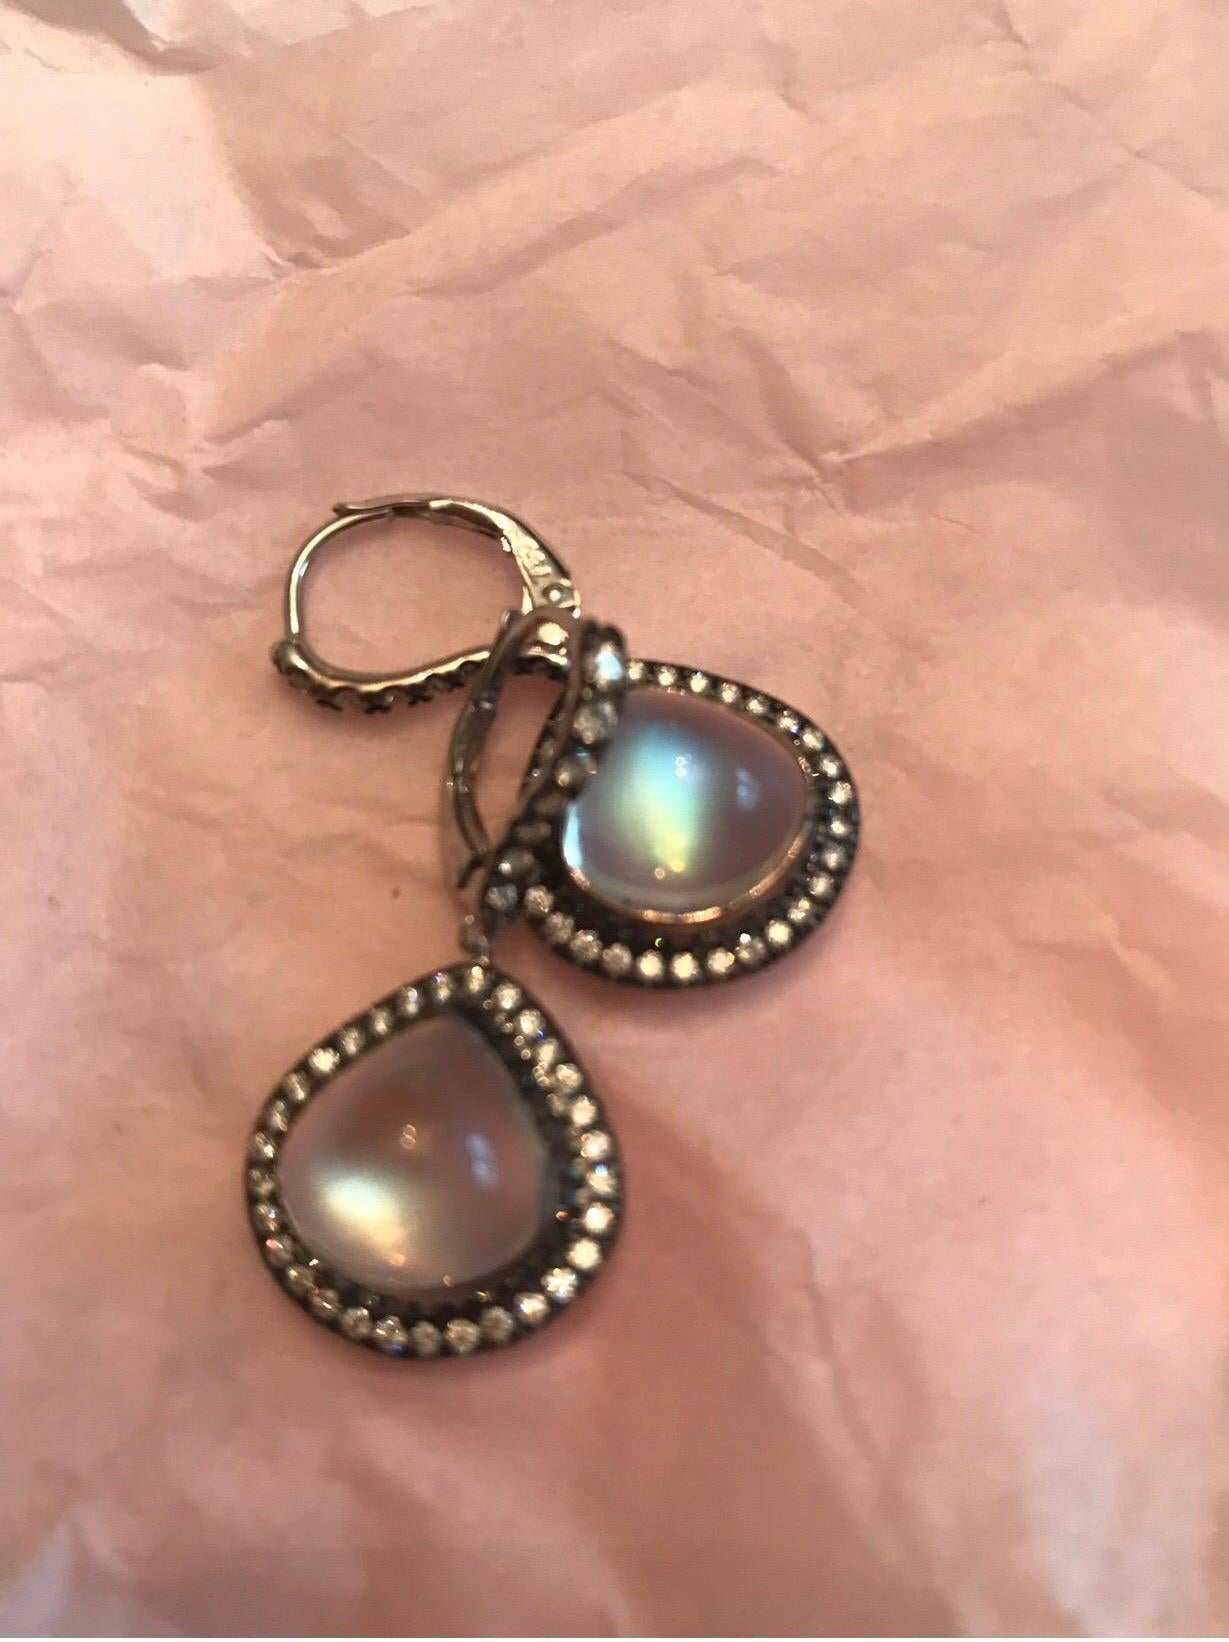 These Magnificent Pear Shape Royal Blue Moonstones  are set in 18 K White Gold, Accented With Colorless Diamonds, Black Rhodium Plated.  The Moonstones  in These Earrings Are Eye Clean and Display Strong Blue Primary Color, In Various Shades Of Blue